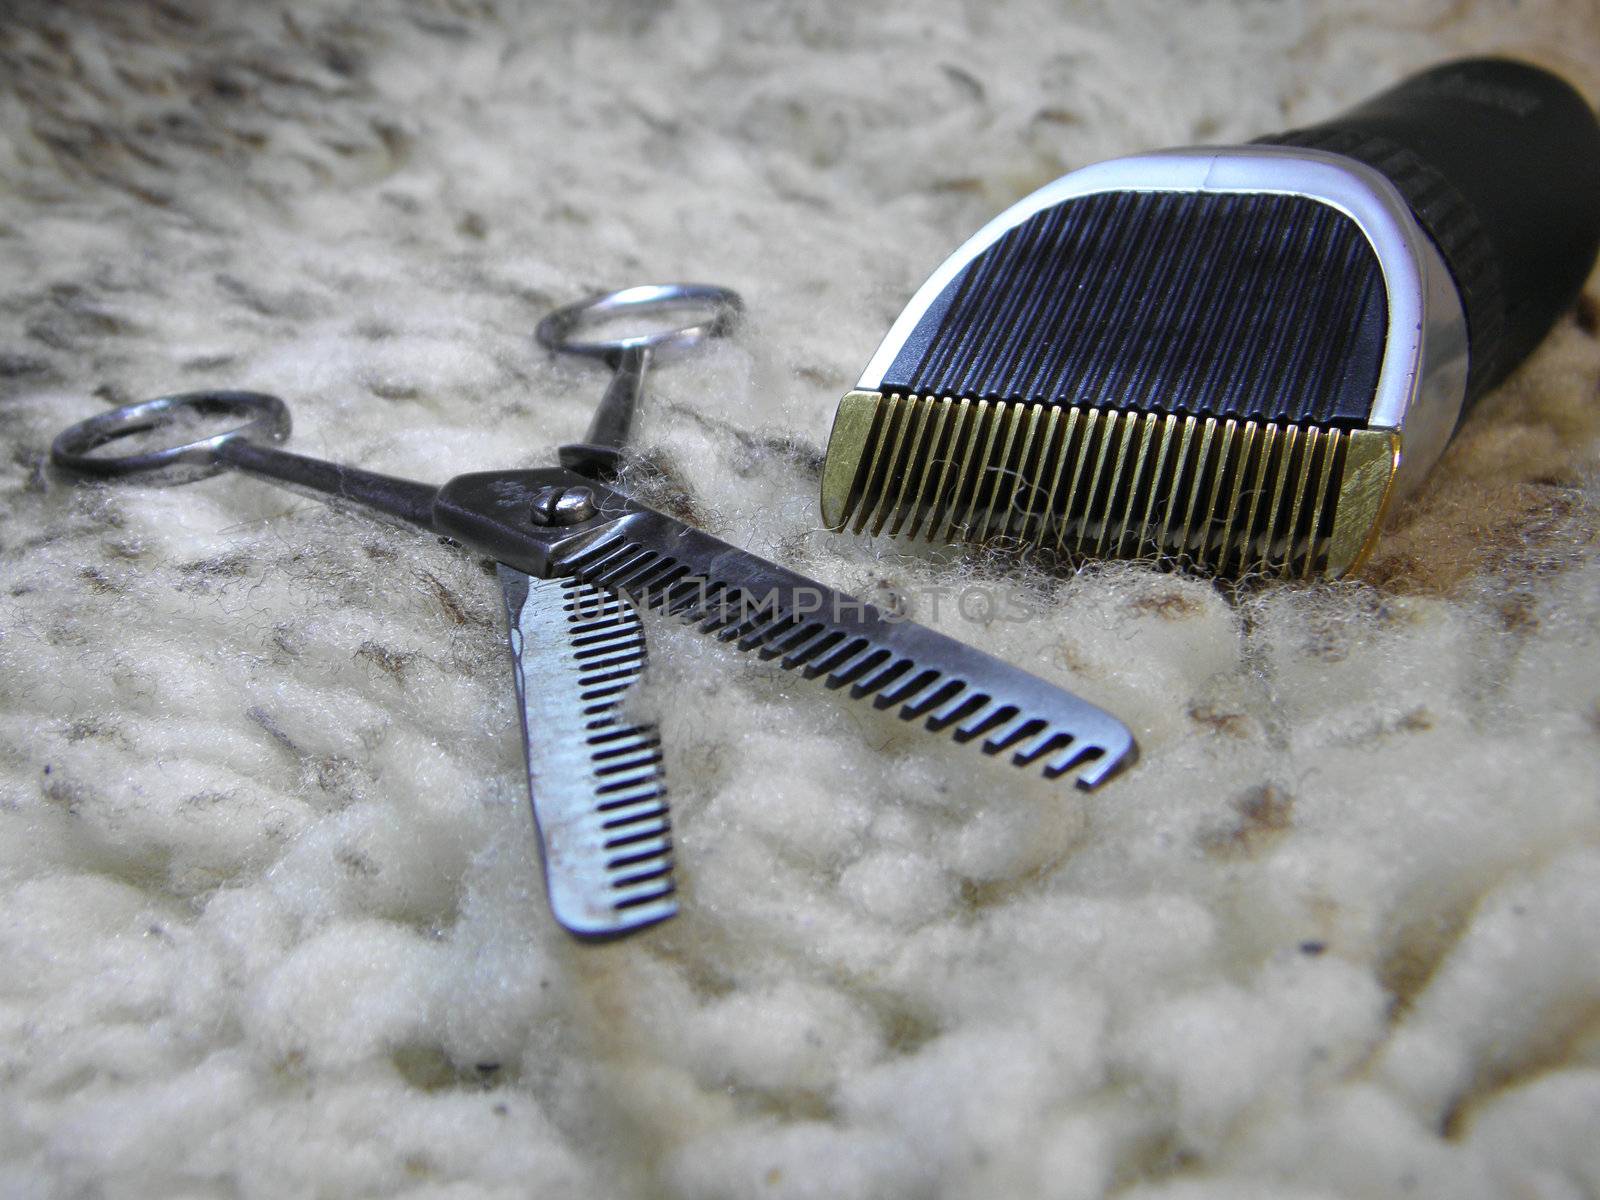 close up of haircutter and scissors